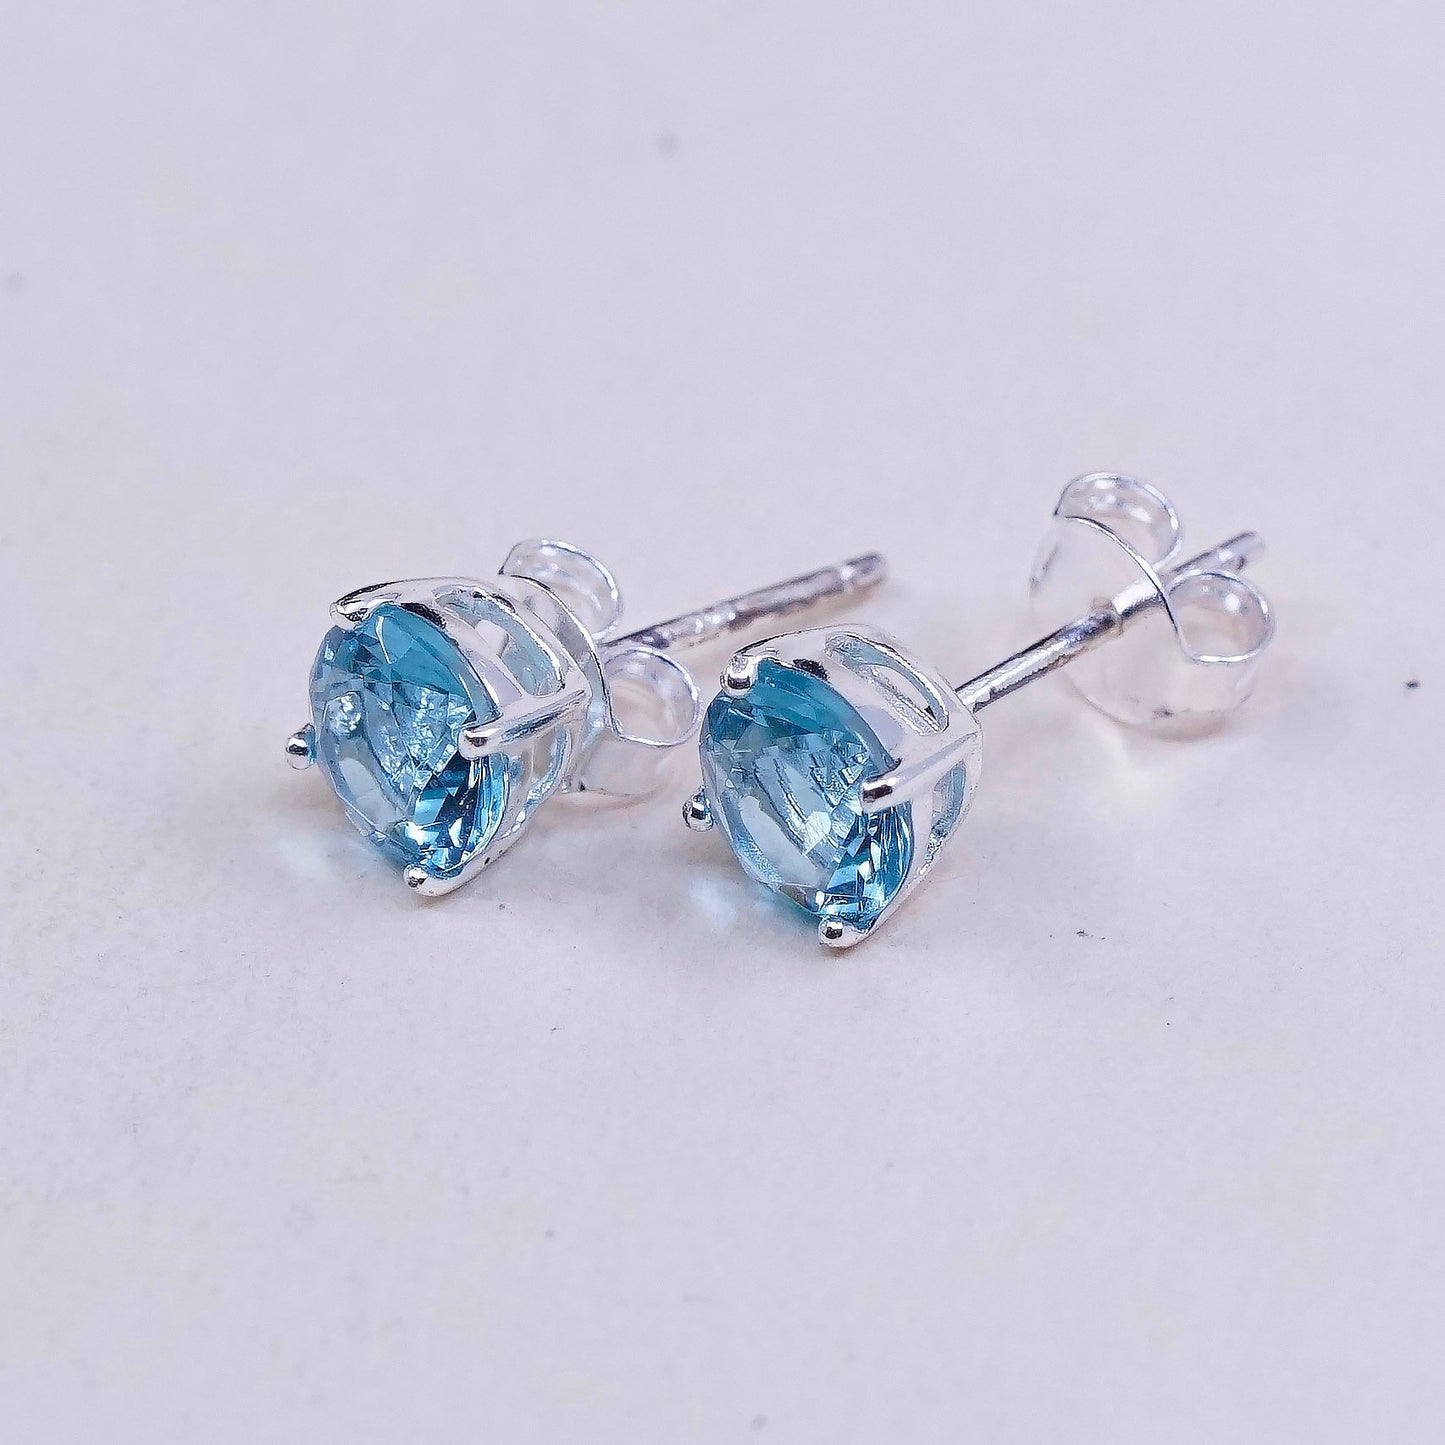 sterling silver earrings with blue topaz details, 925 silver studs, stamped 925